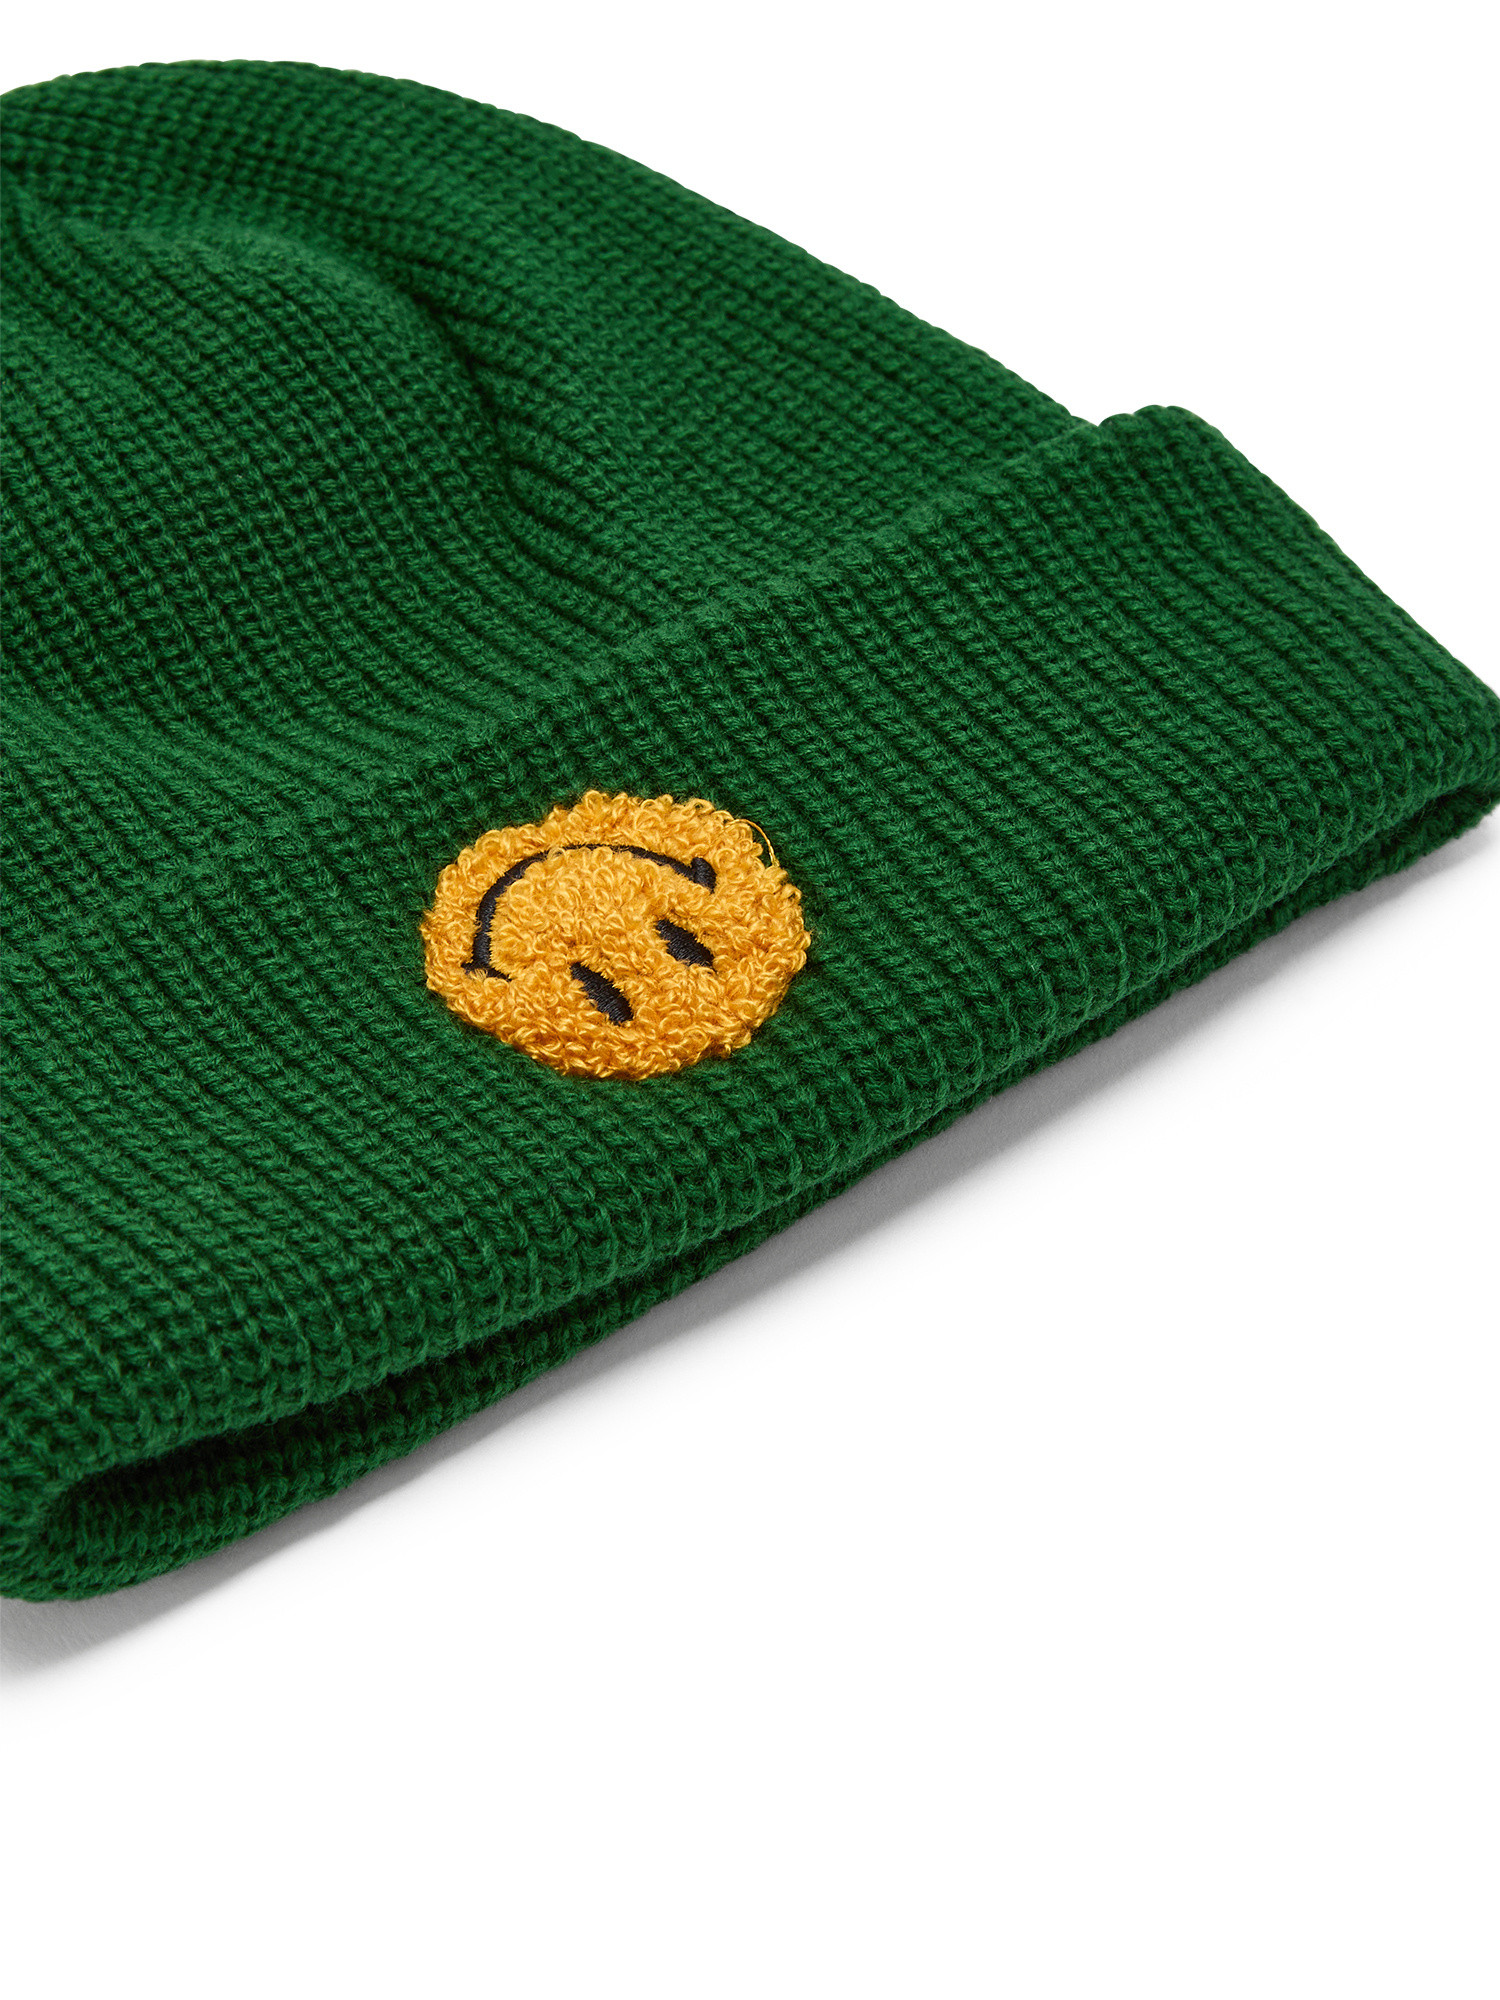 Market - Smiley® upside down beanie, Green, large image number 1